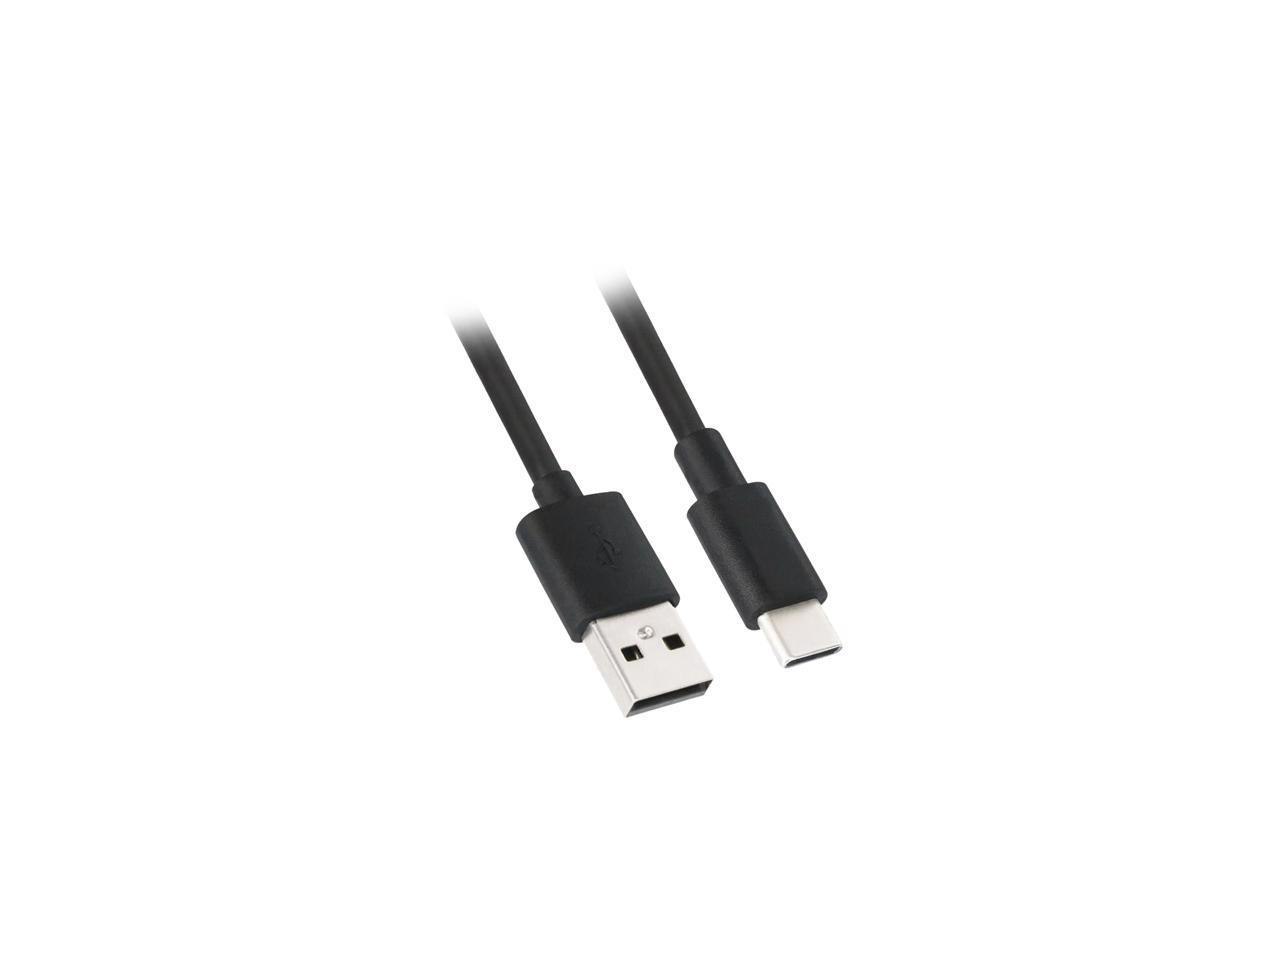 Nippon Labs 50Usb2-Cm-Am-10 10 FT. Usb-C Male To Usb A Male Charge And Data Transfer Cable - Black